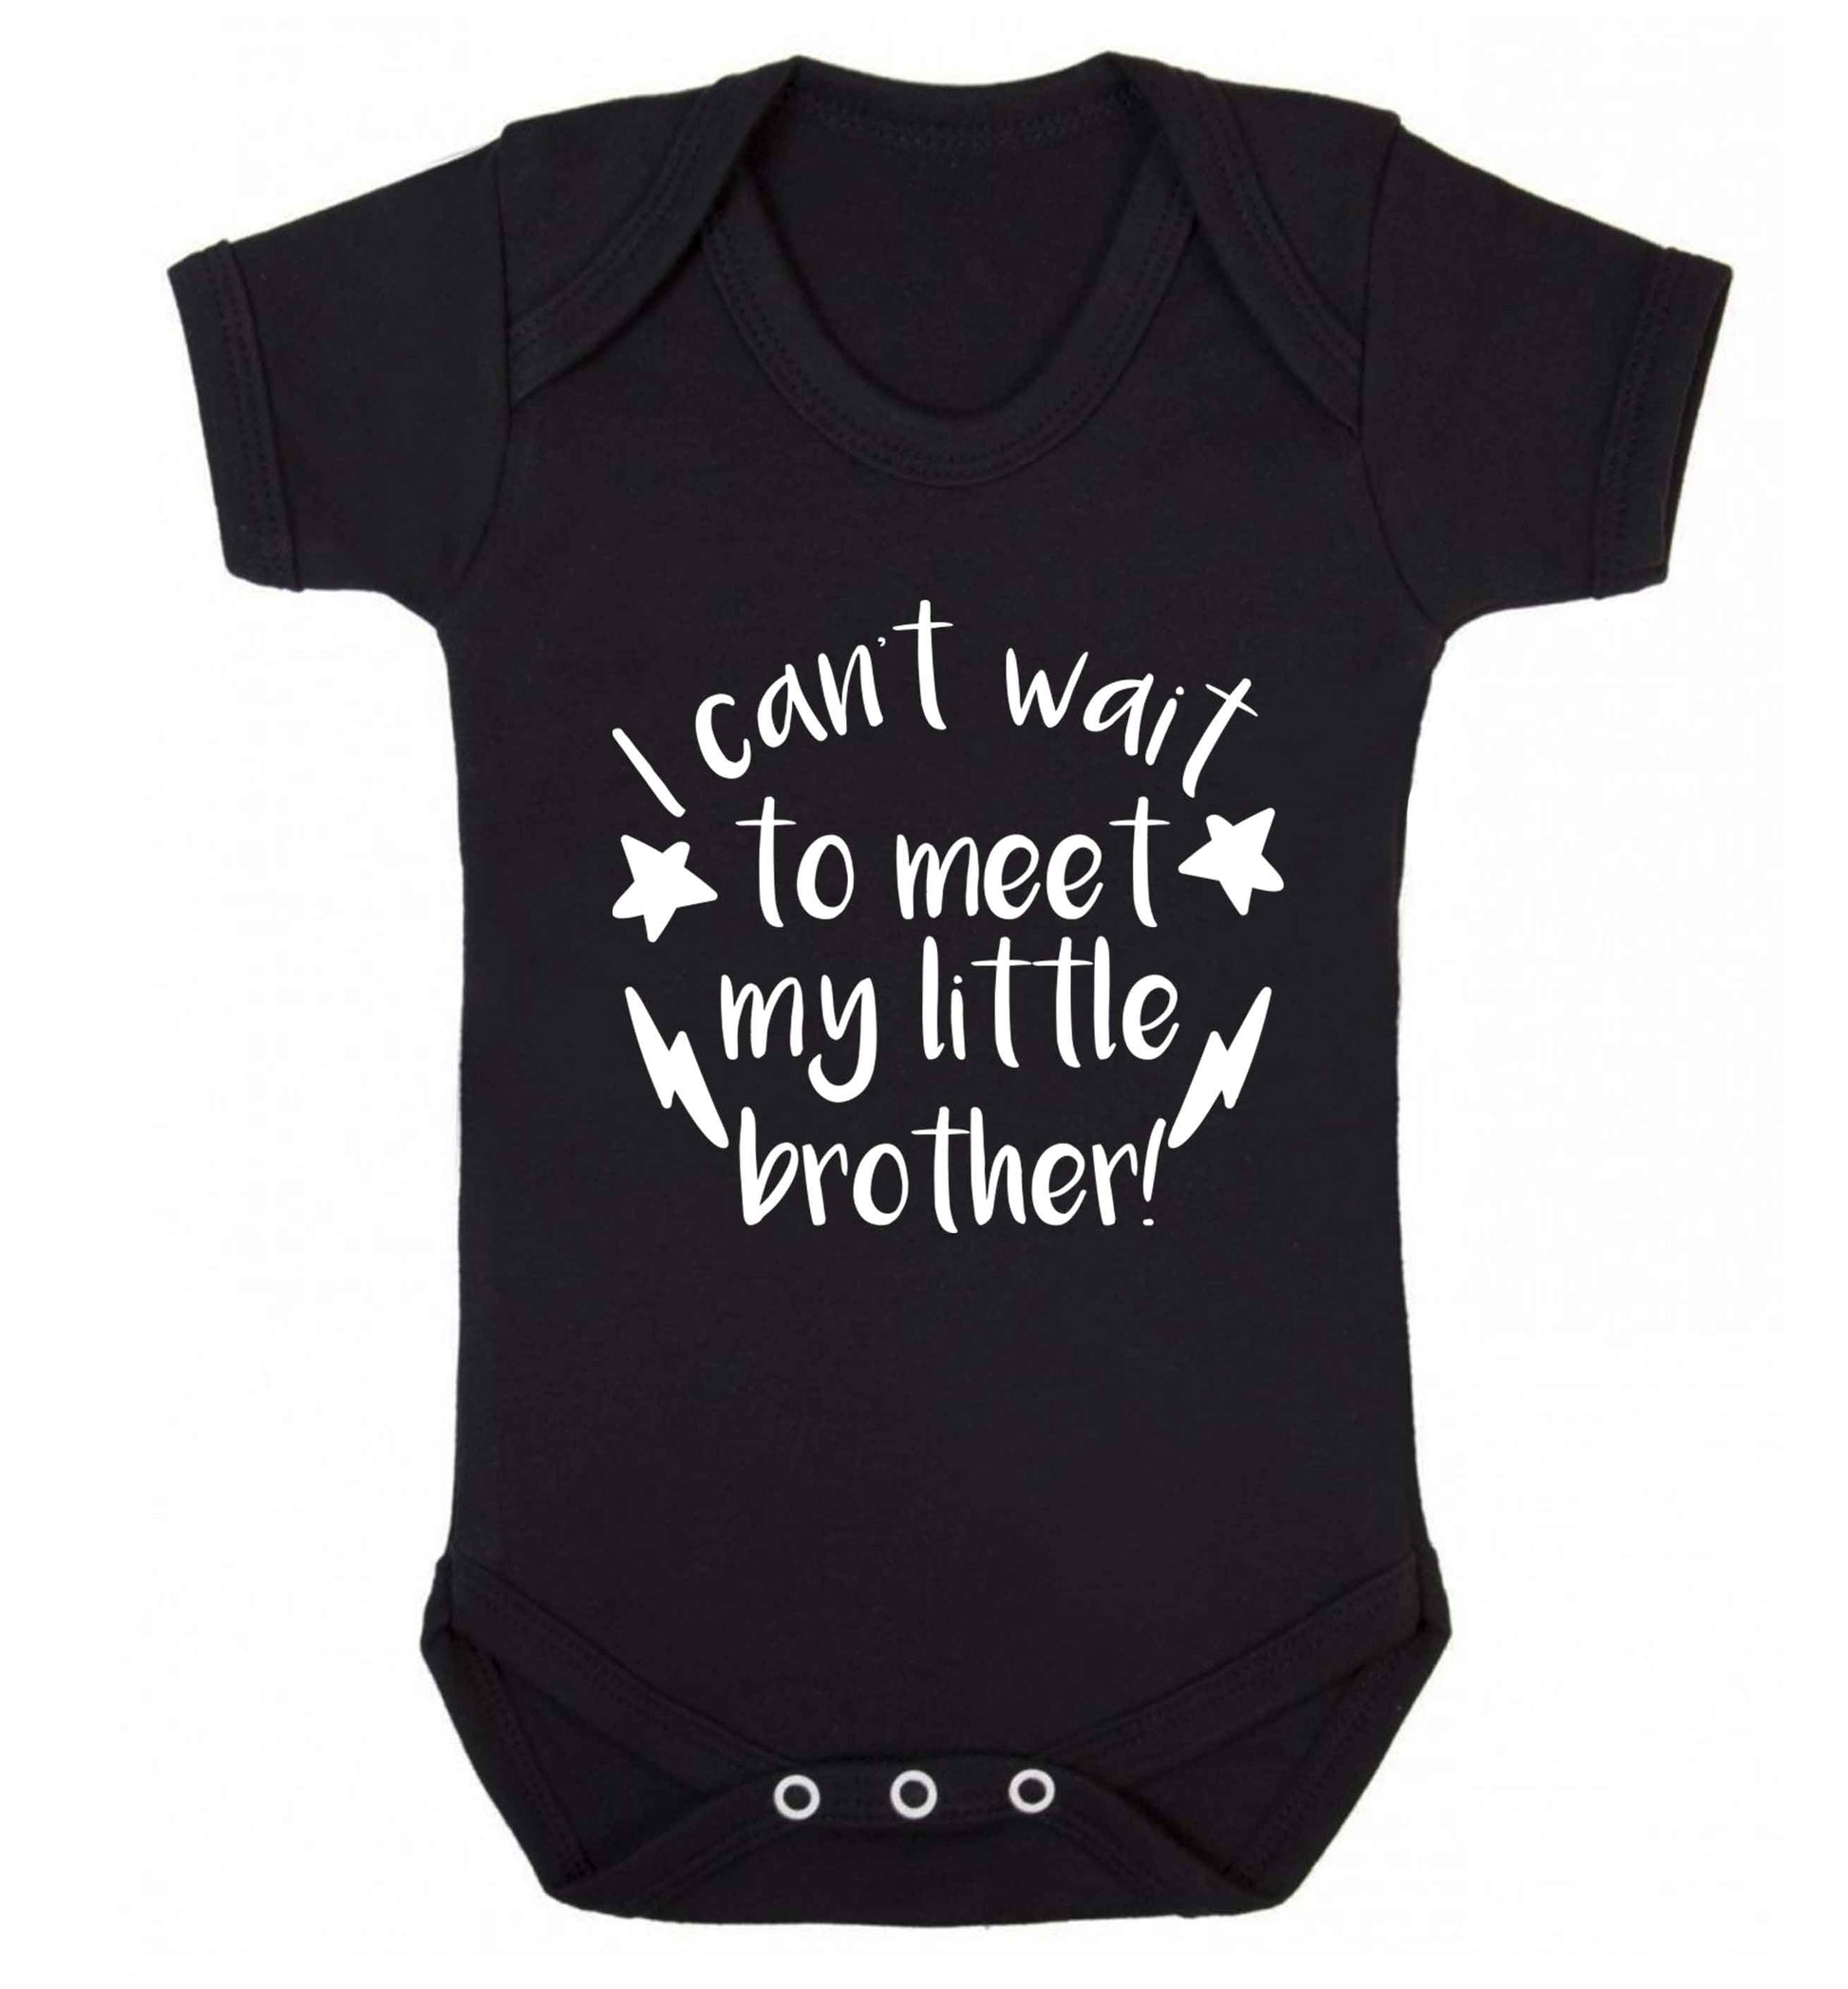 I can't wait to meet my sister! Baby Vest black 18-24 months